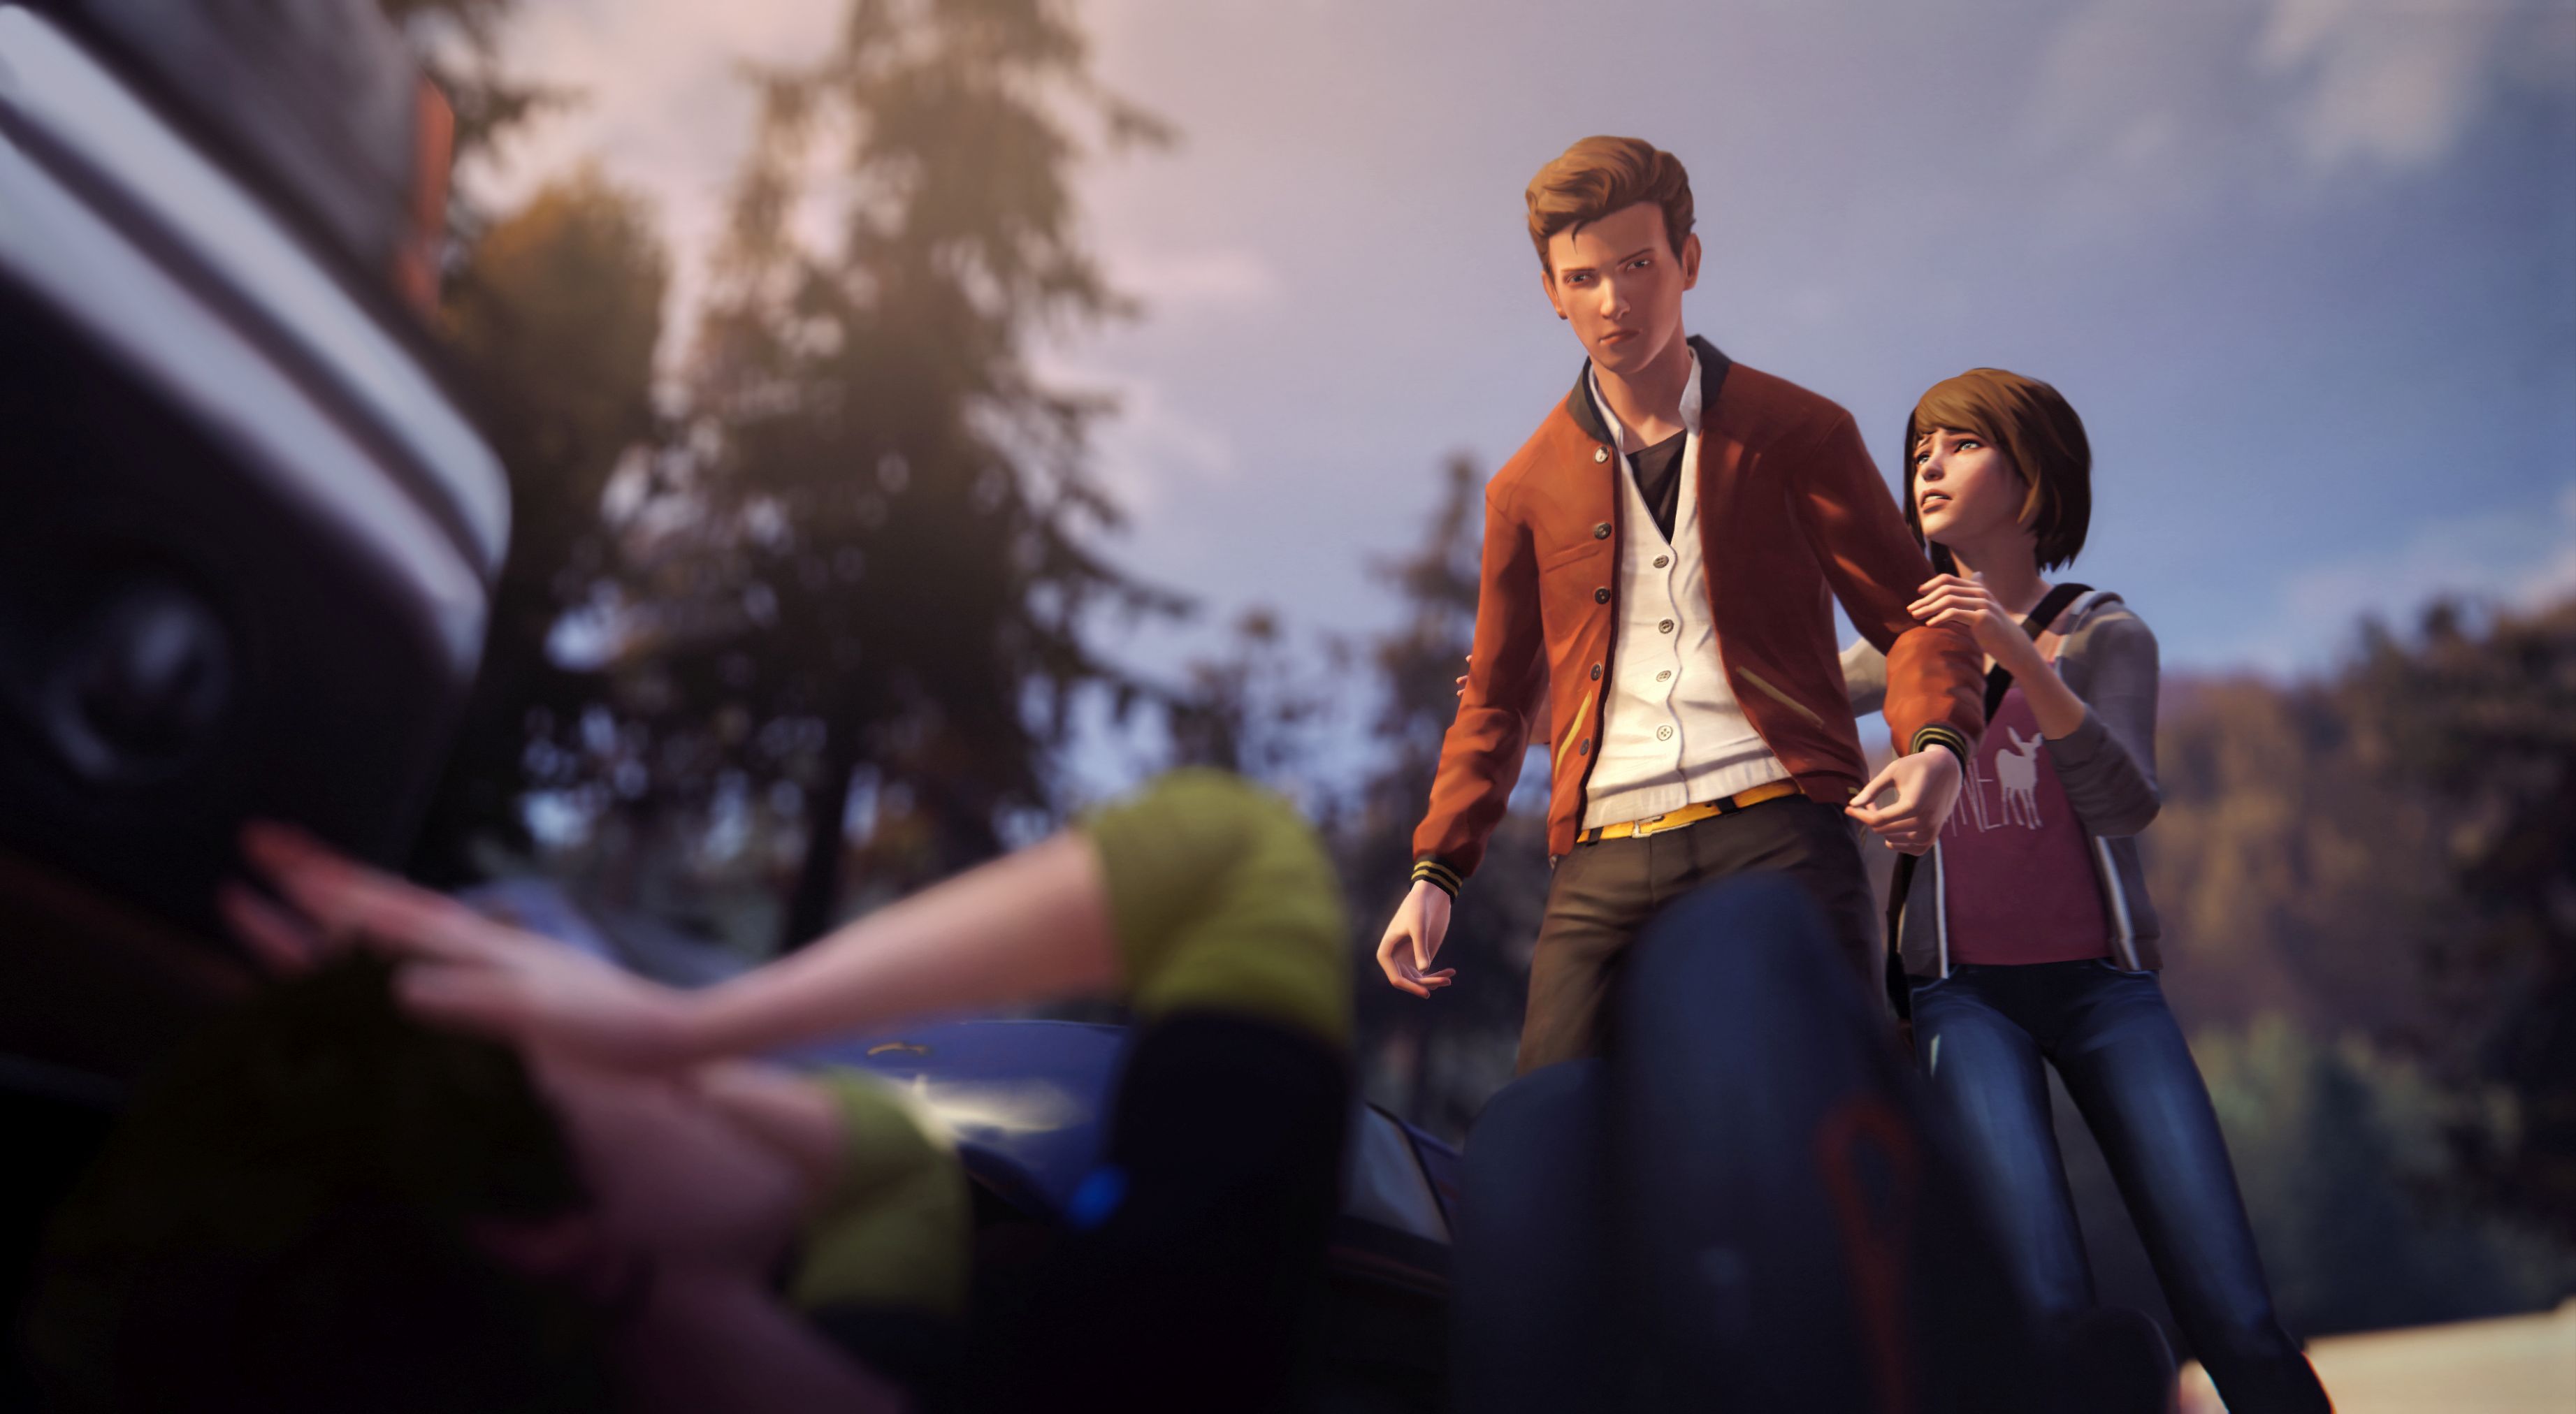 Amazing Life Is Strange Pictures & Backgrounds